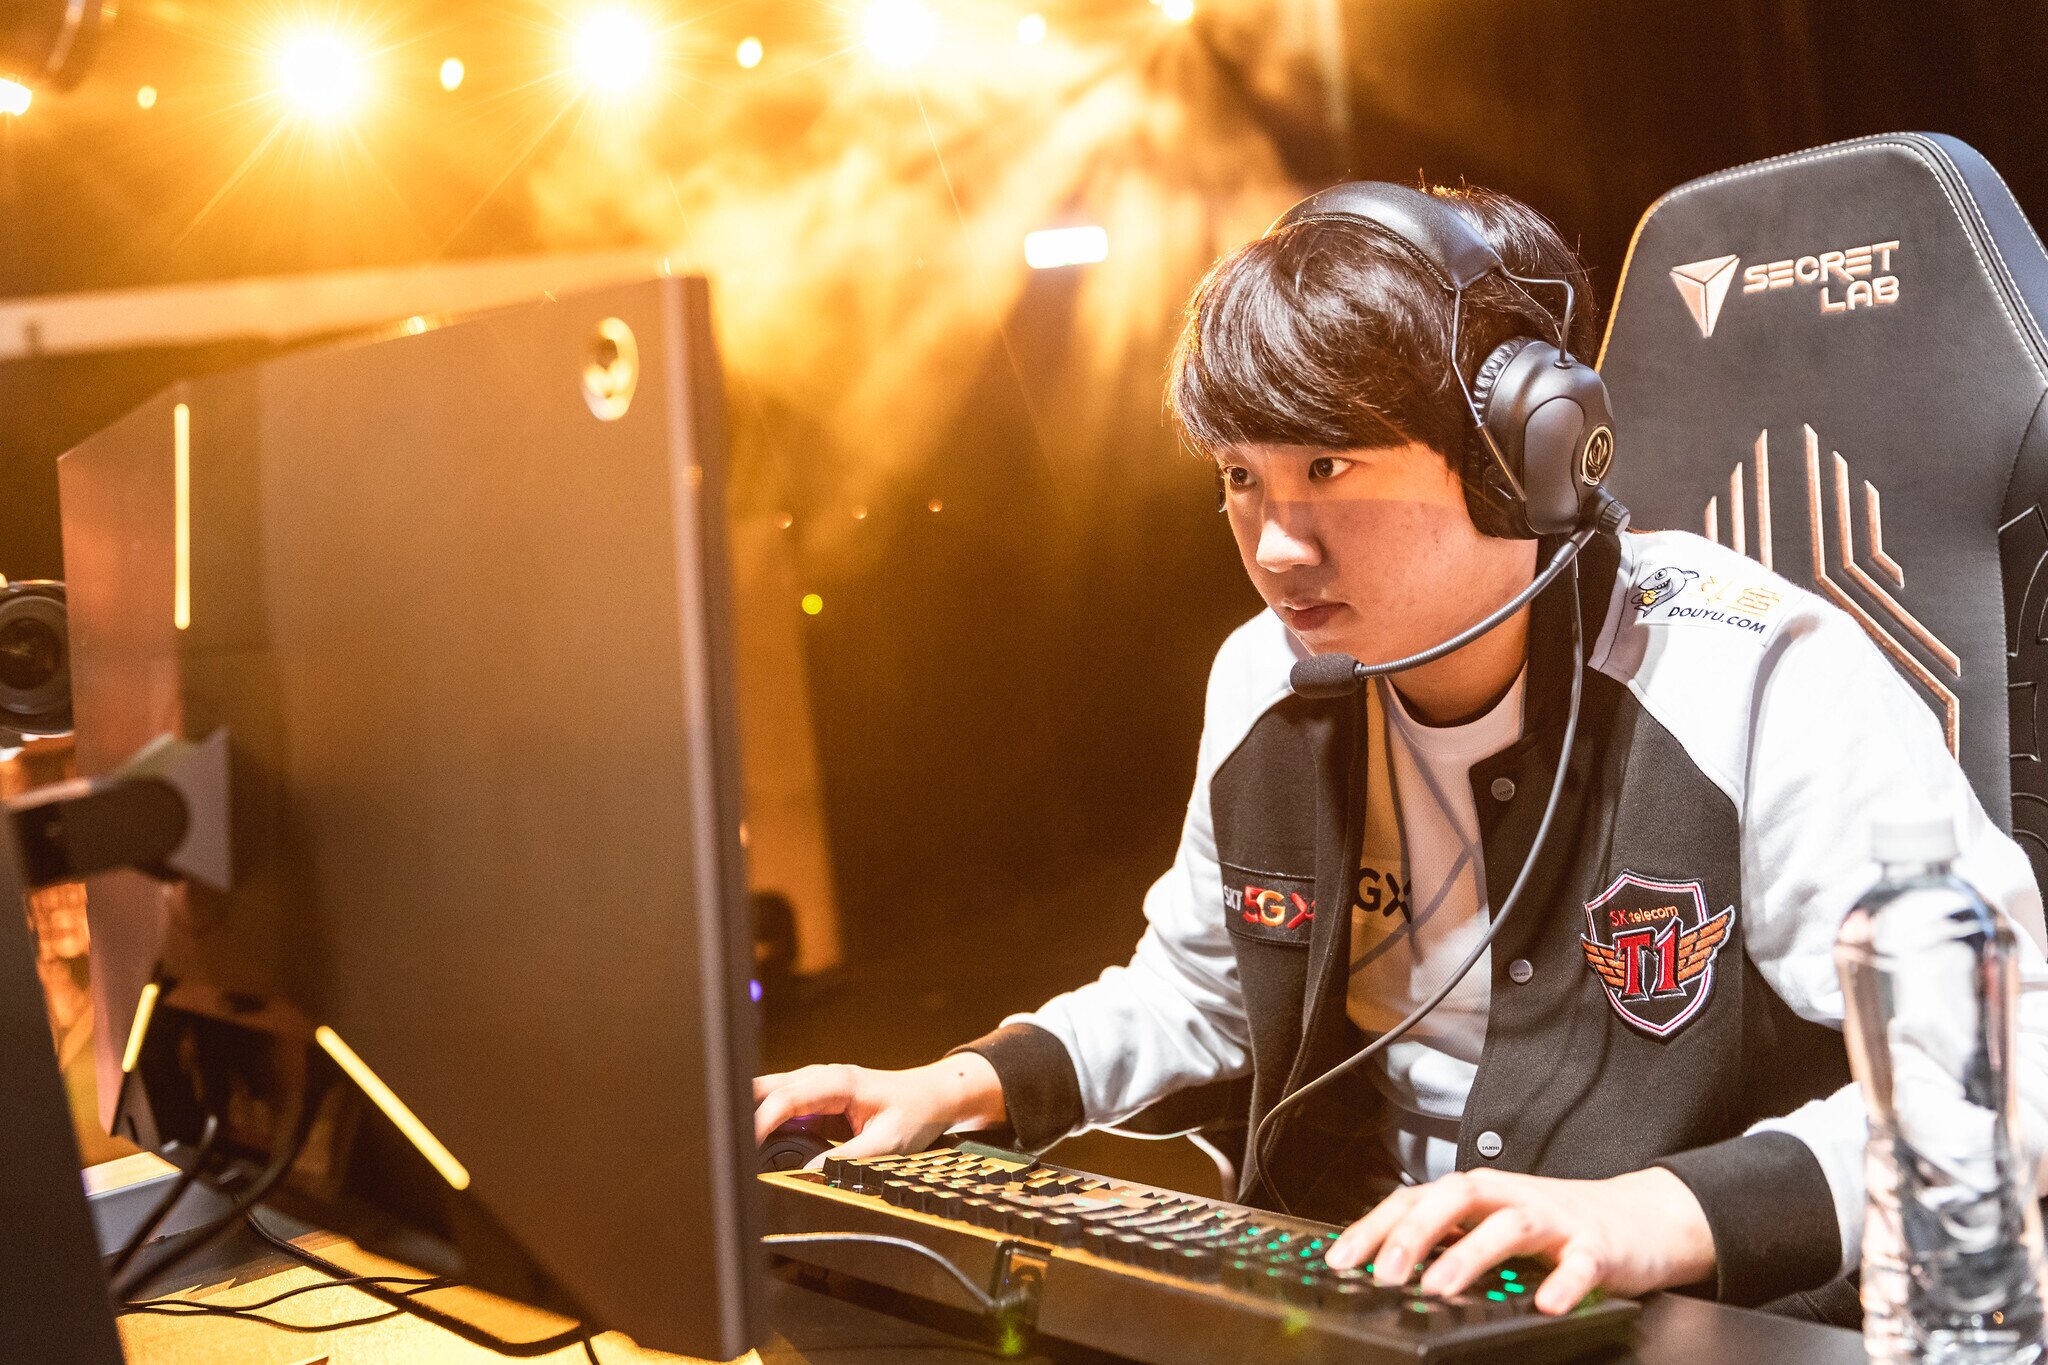 The rich got richer in the roster shuffle, as FunPlus Phoenix added Khan to their roster (Photo via Riot Games)